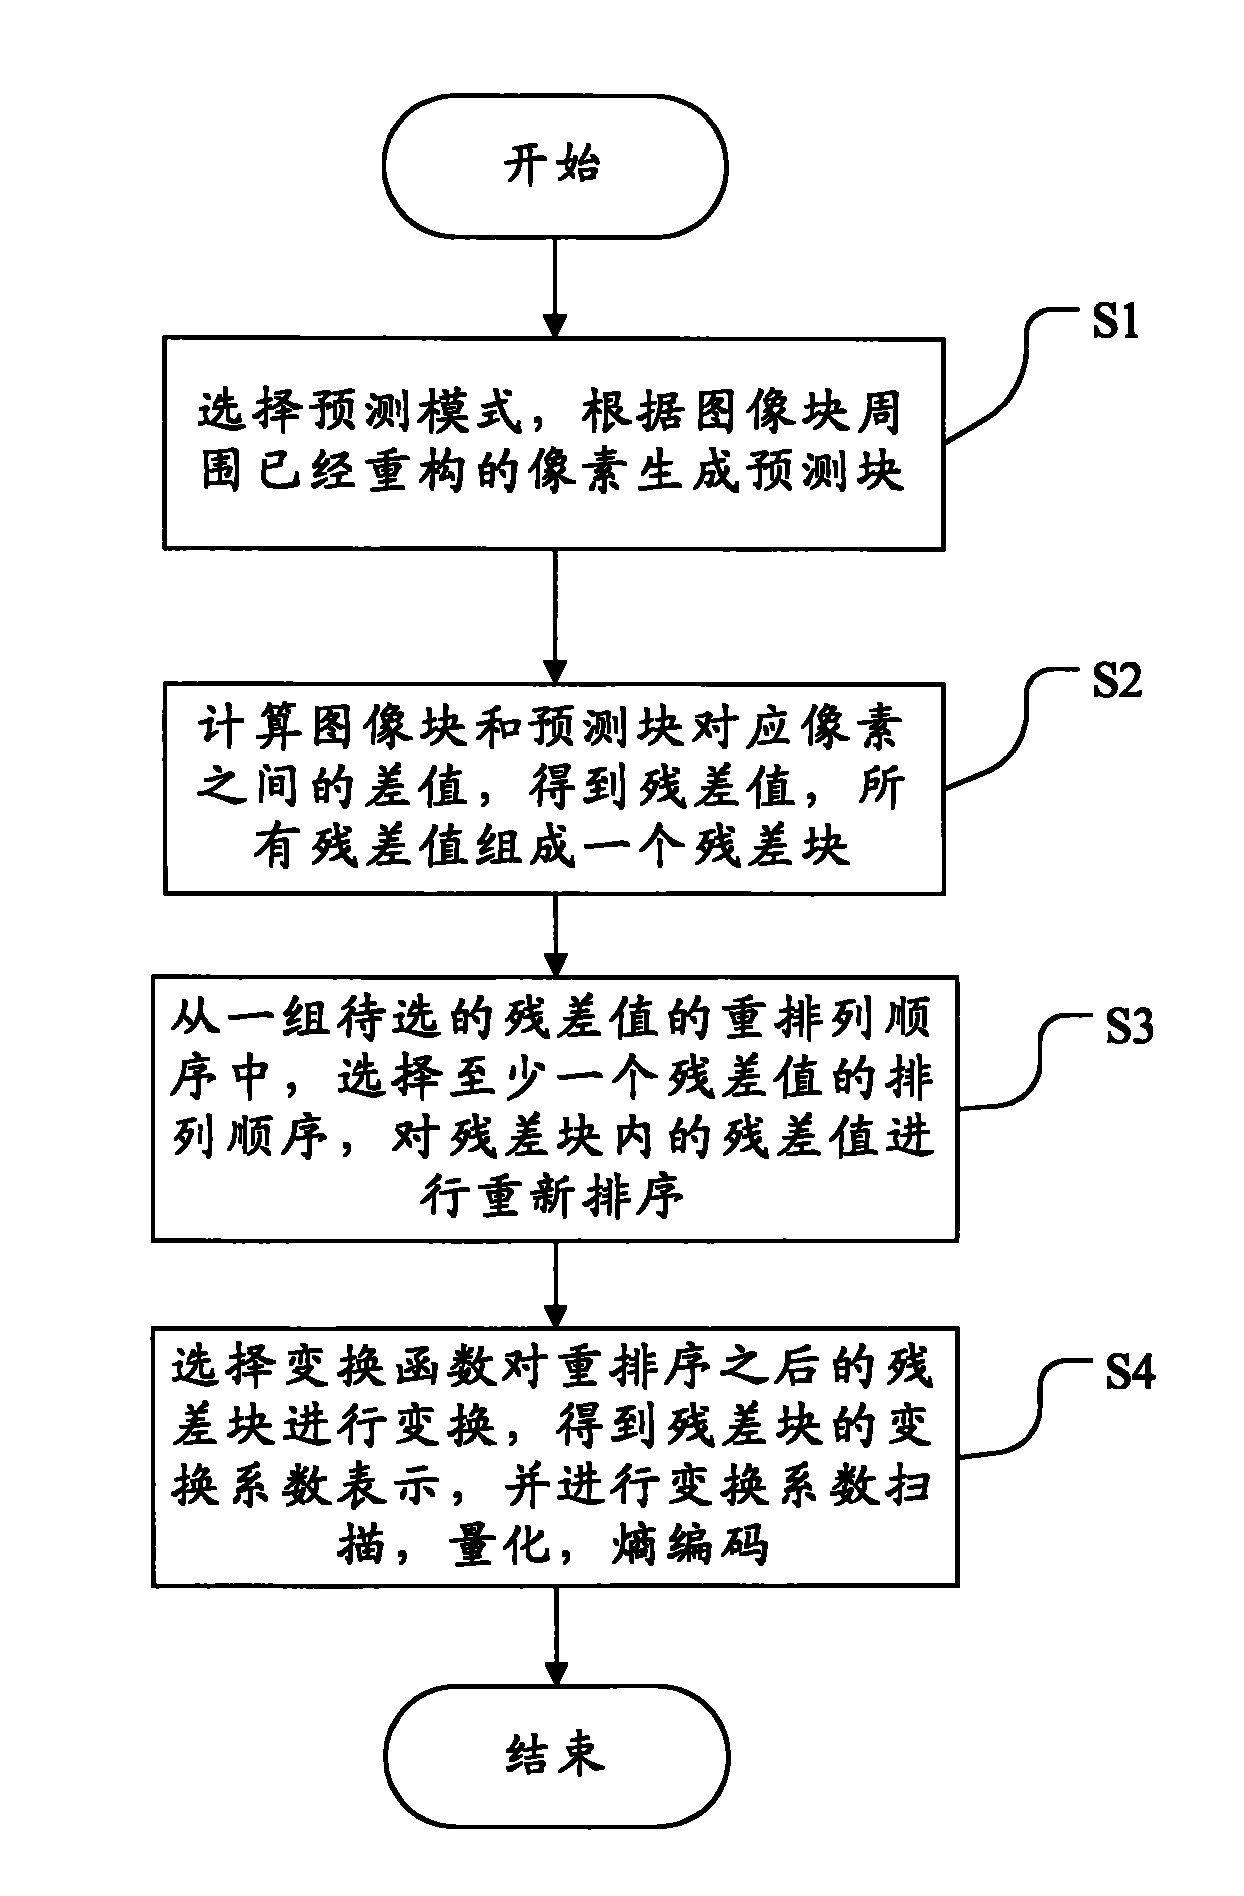 Method and system for coding, decoding and reconstructing video image blocks